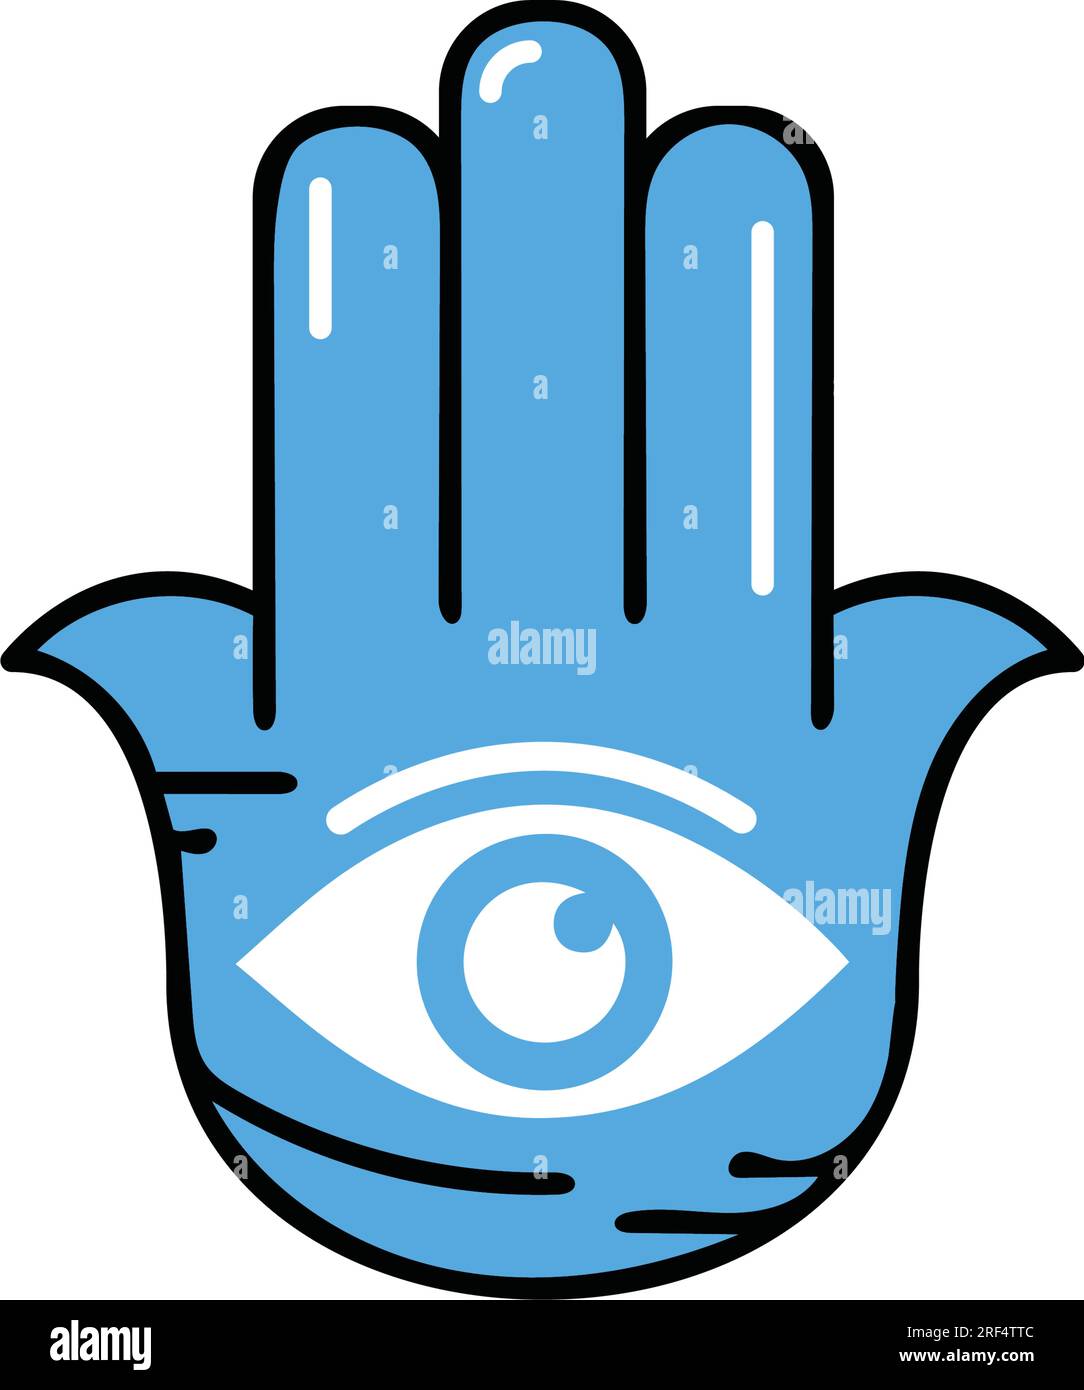 Abstract Multicolored illustration of a Hamsa hand with Evil Eye symbol.  The hand of Fatima is a religious sign with all-seeing eyes. Vintage bohemian style. Stock Vector